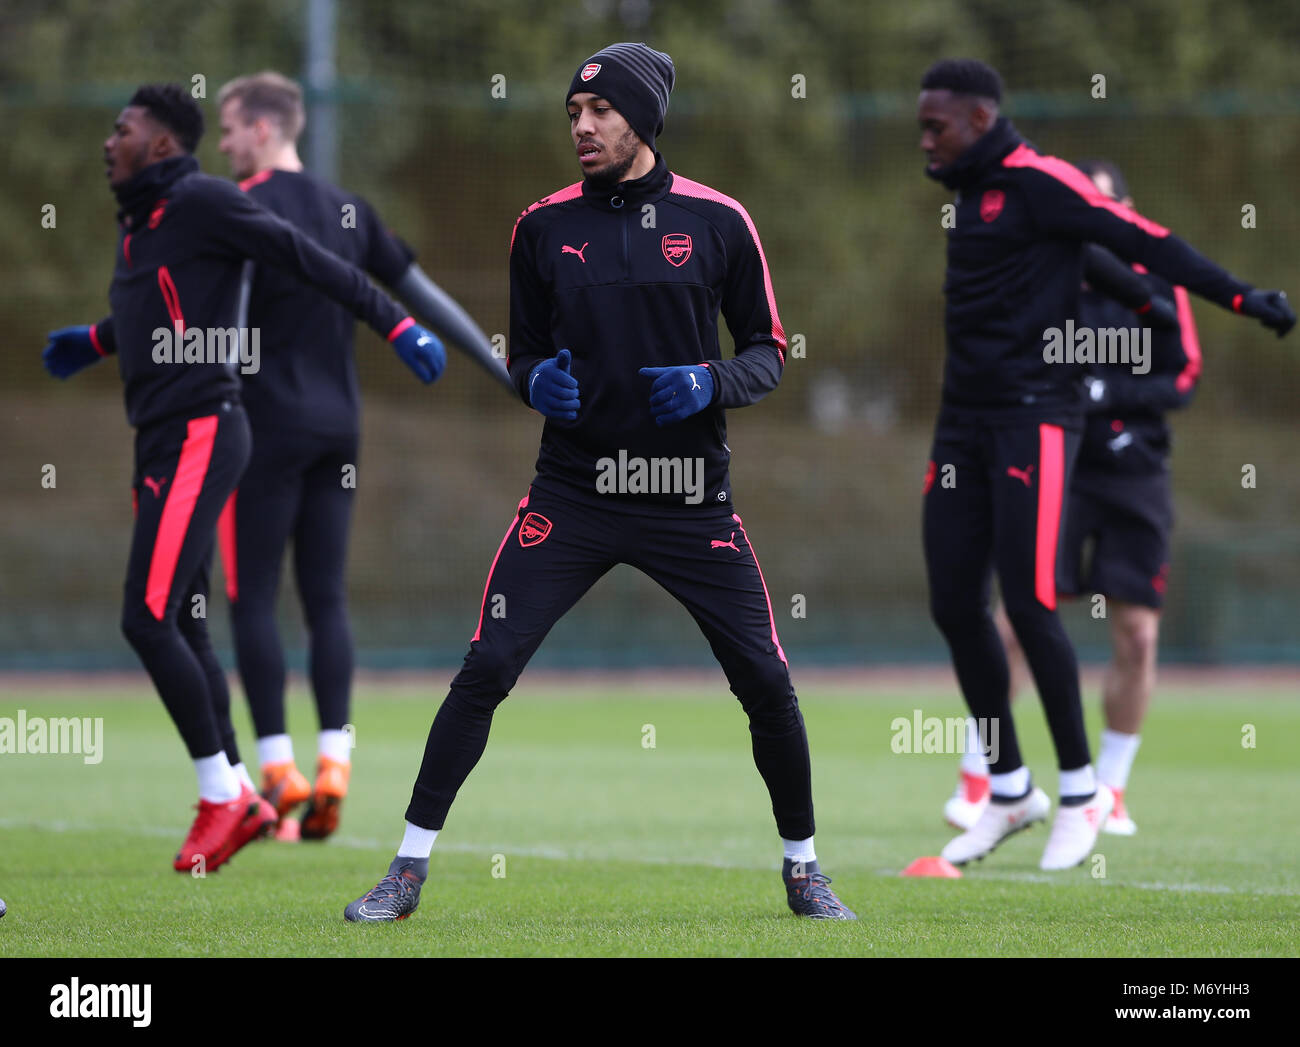 Arsenal's Pierre-Emerick Aubameyang (centre) during the training session at London Colney, Hertfordshire. PRESS ASSOCIATION Photo. Picture date: Wednesday March 7, 2018. See PA story SOCCER Arsenal. Photo credit should read: Tim Goode/PA Wire Stock Photo